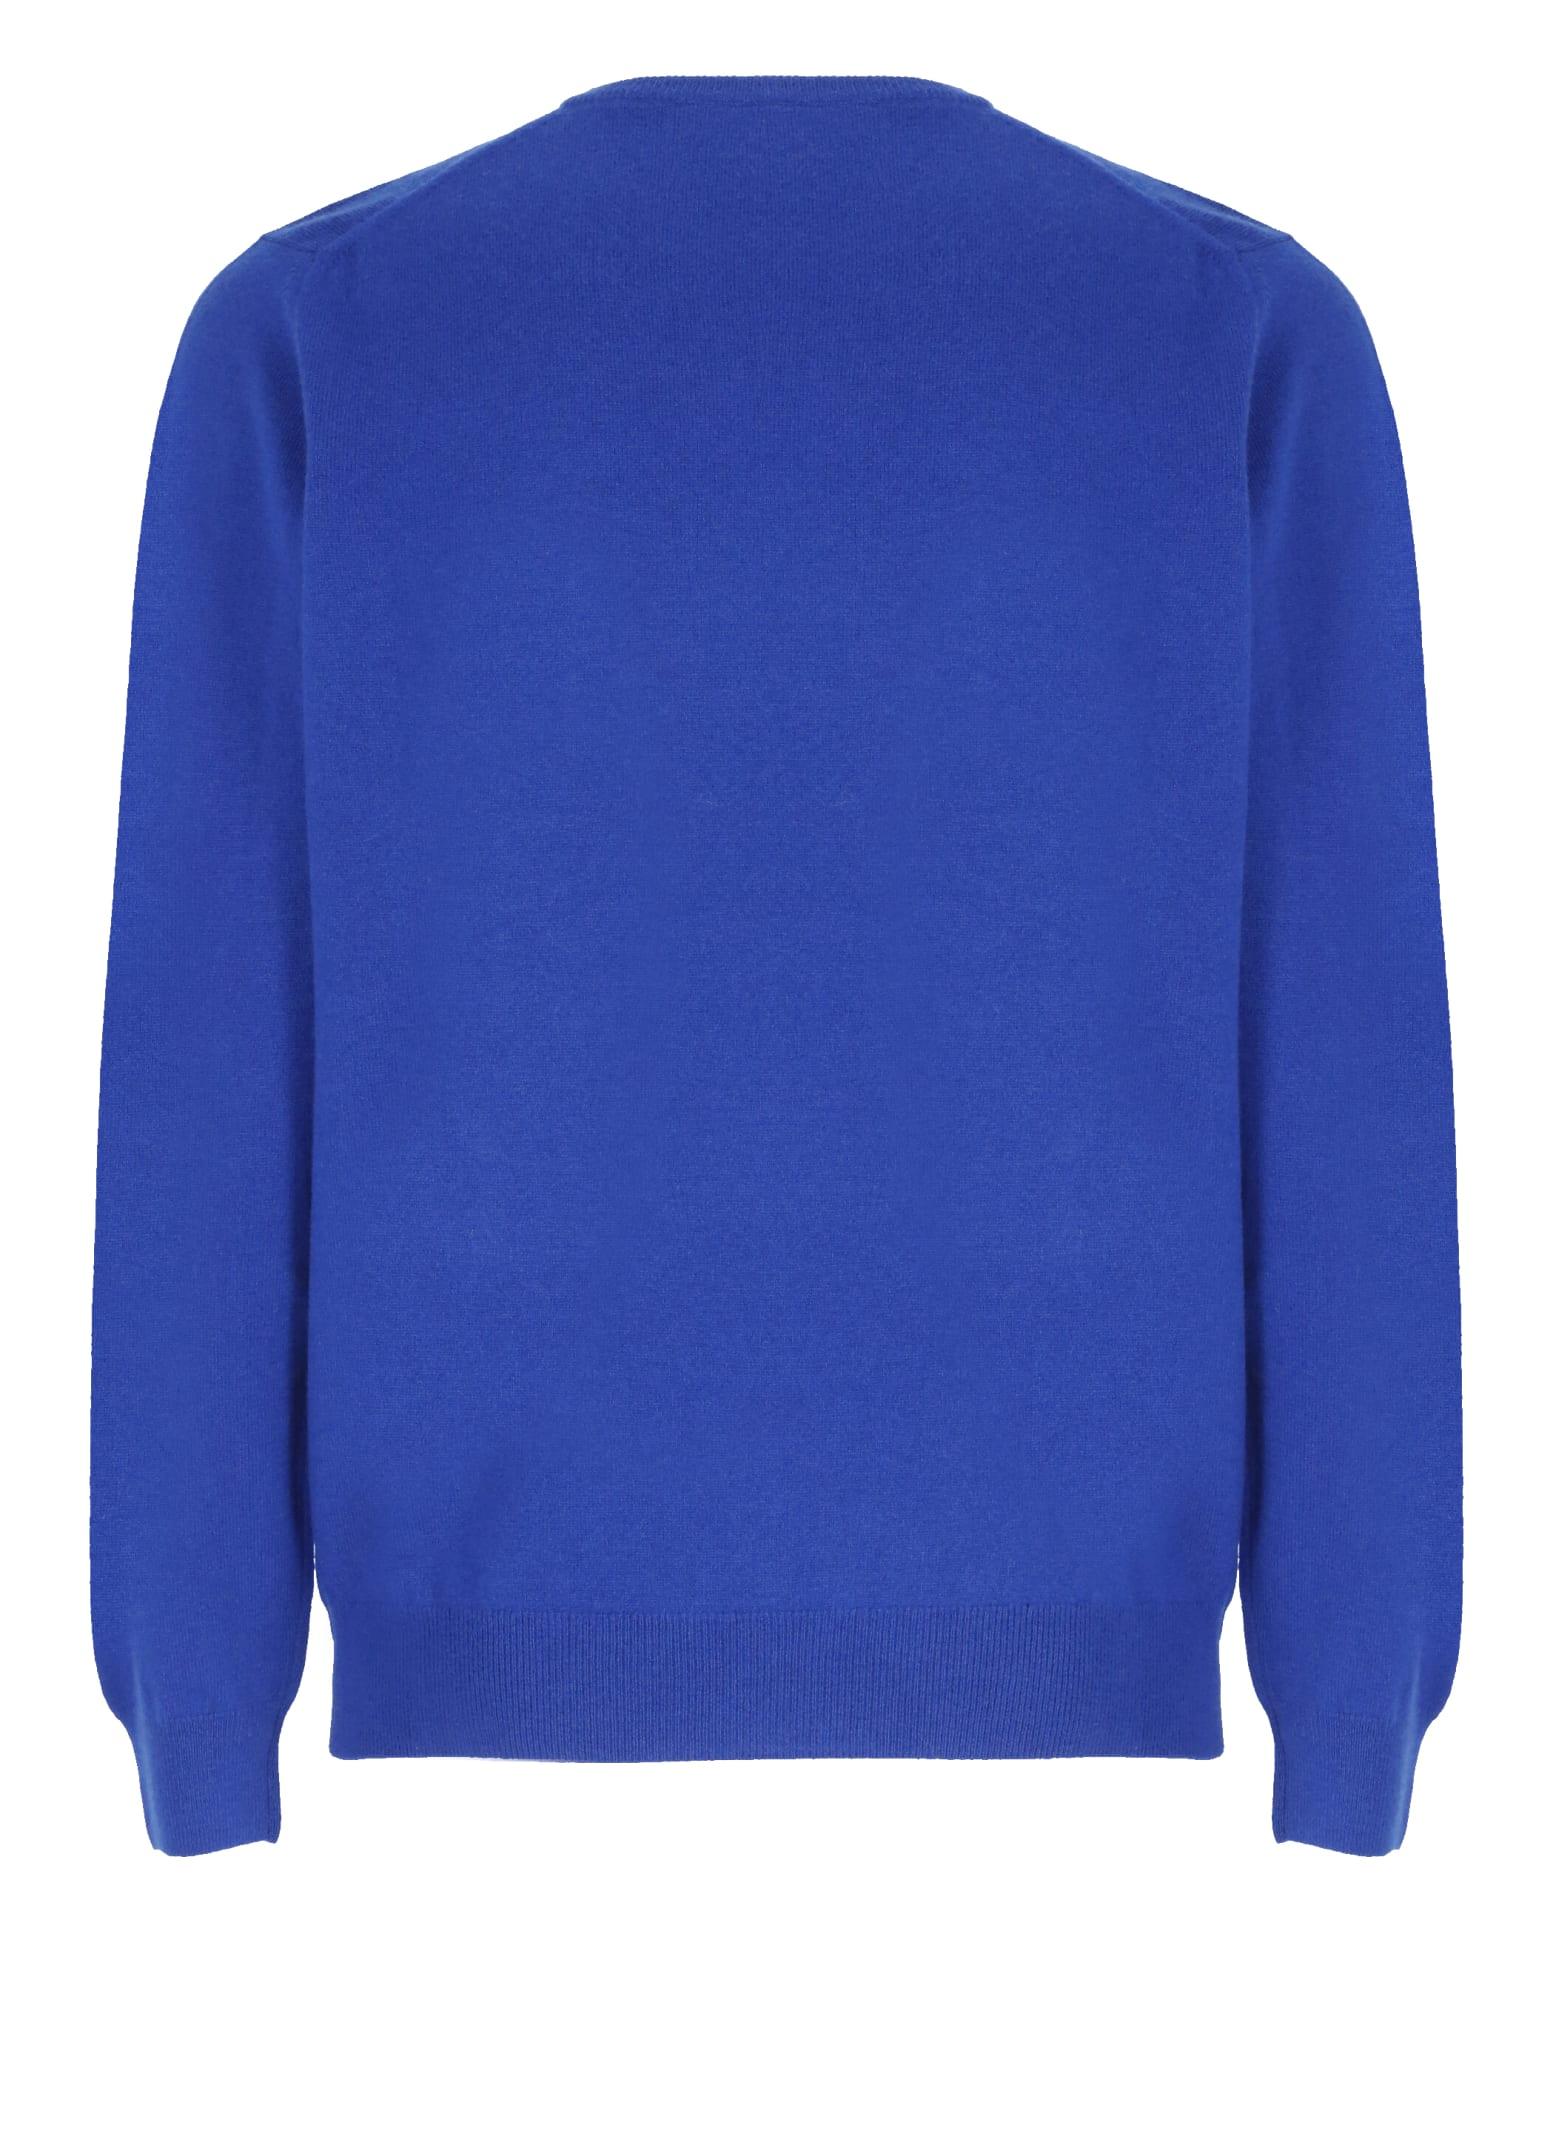 Della Ciana Wool And Cashmere Sweater in Blue for Men | Lyst